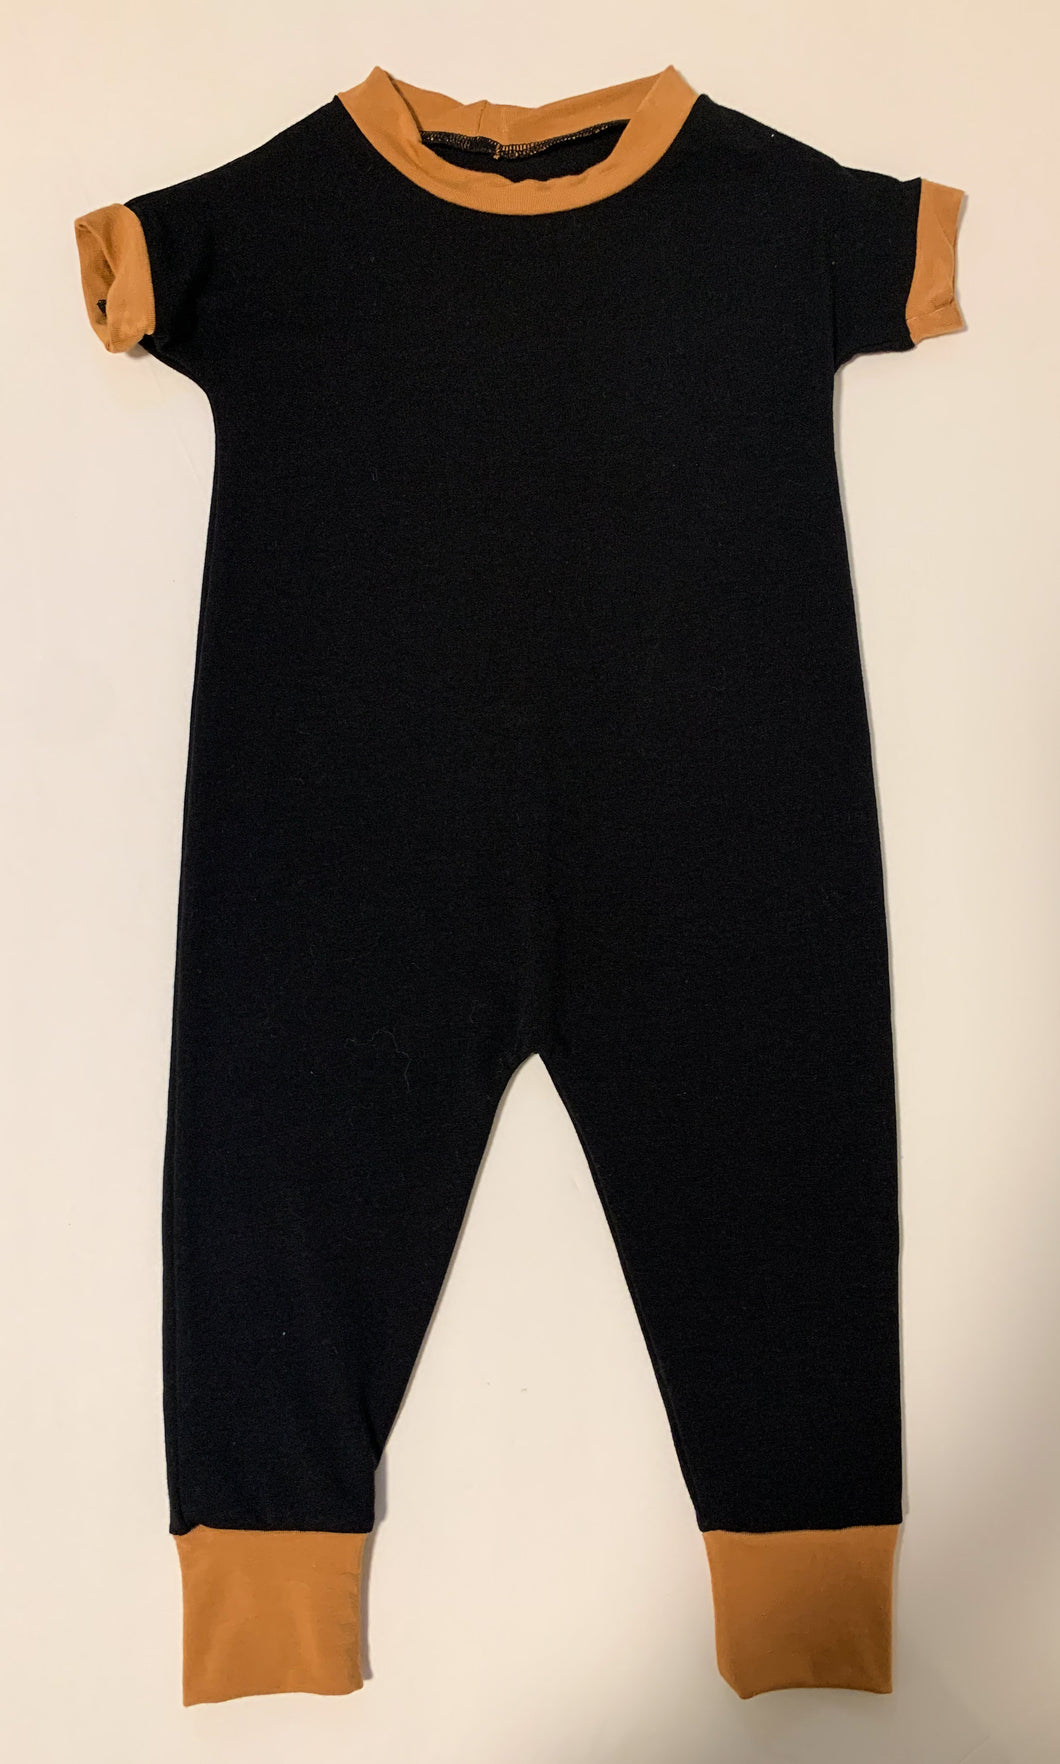 OOAK (One of a Kind) 6-18m Solid Black Bamboo Romper with Mustard Trim